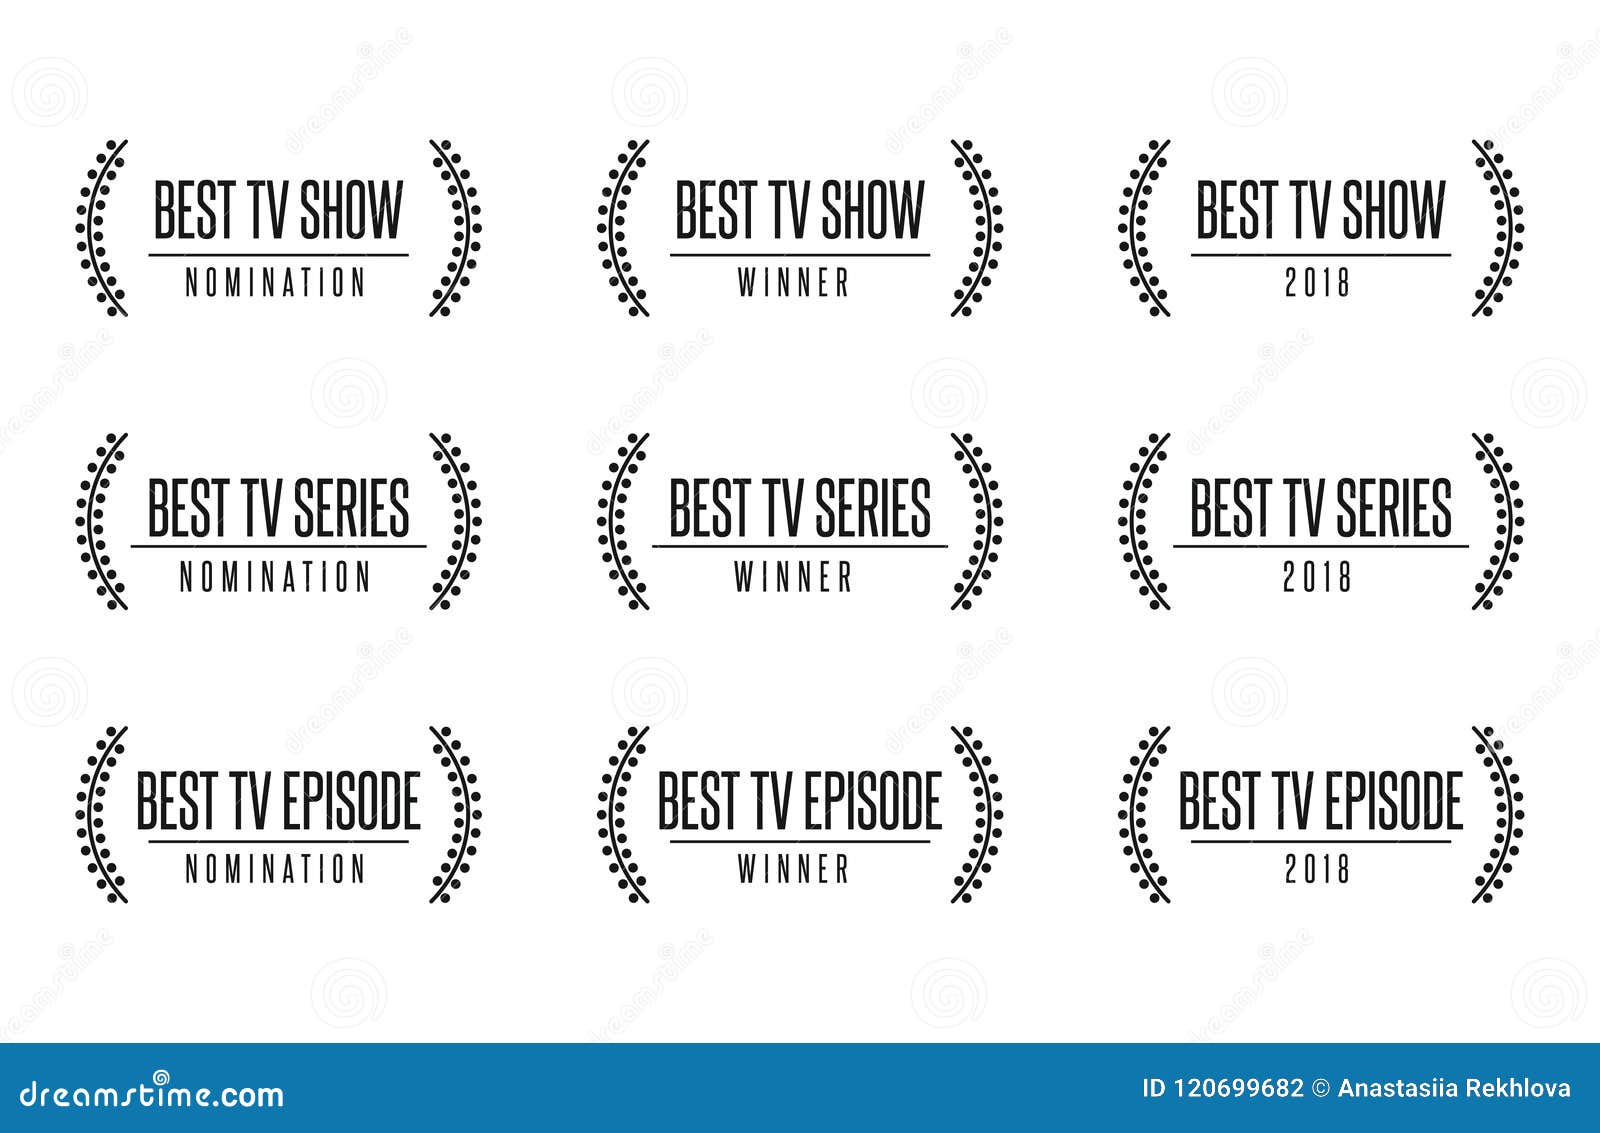 Awards By TV Series